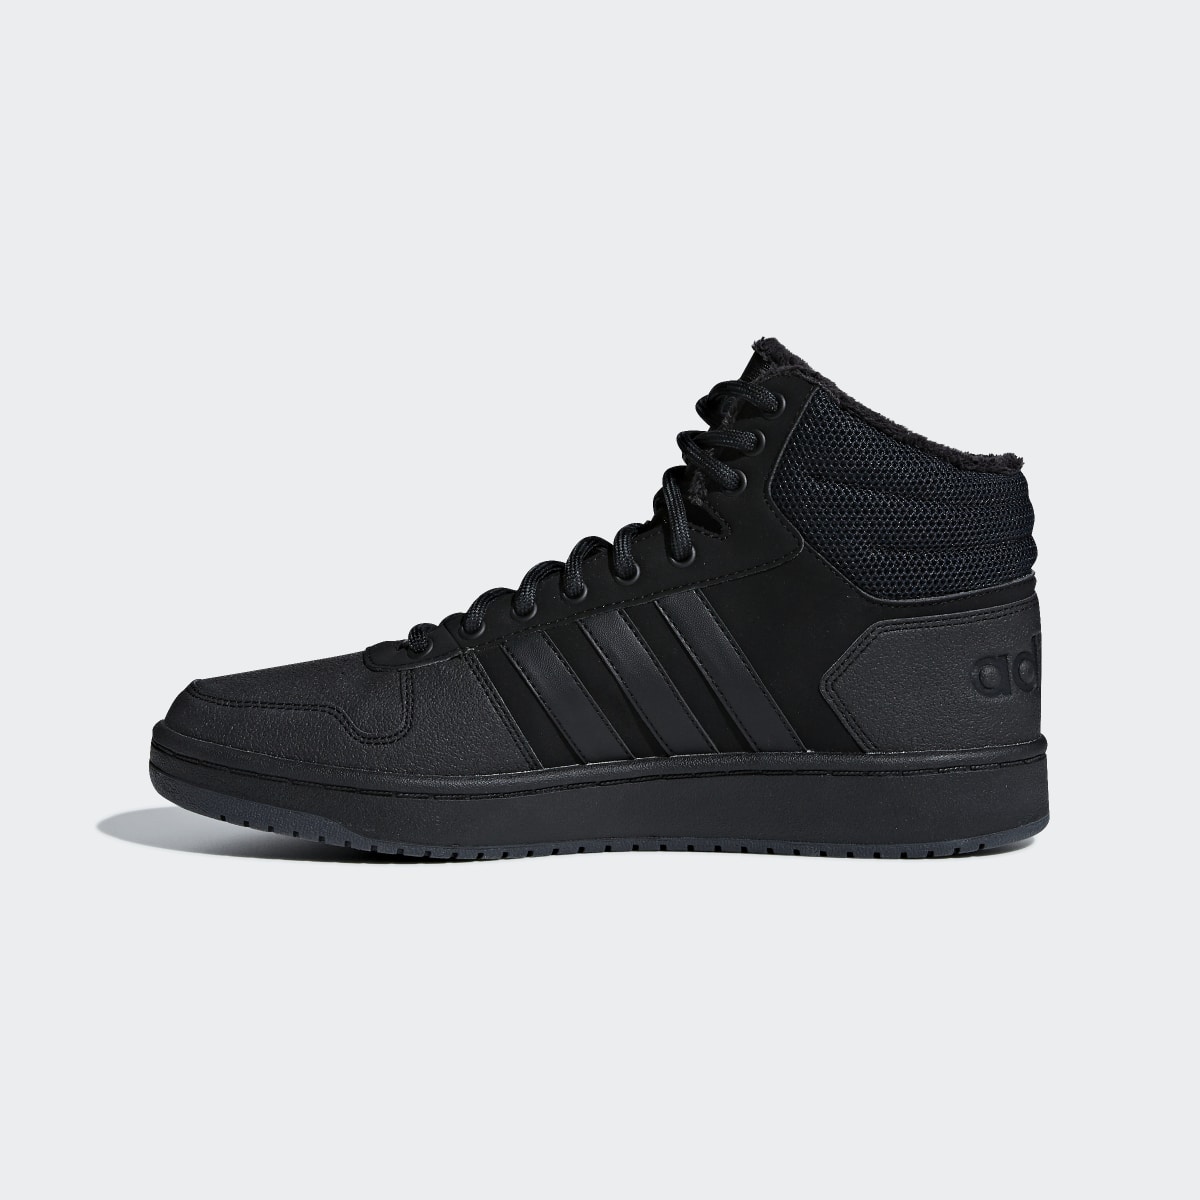 Adidas Hoops 2.0 Mid Shoes. 8